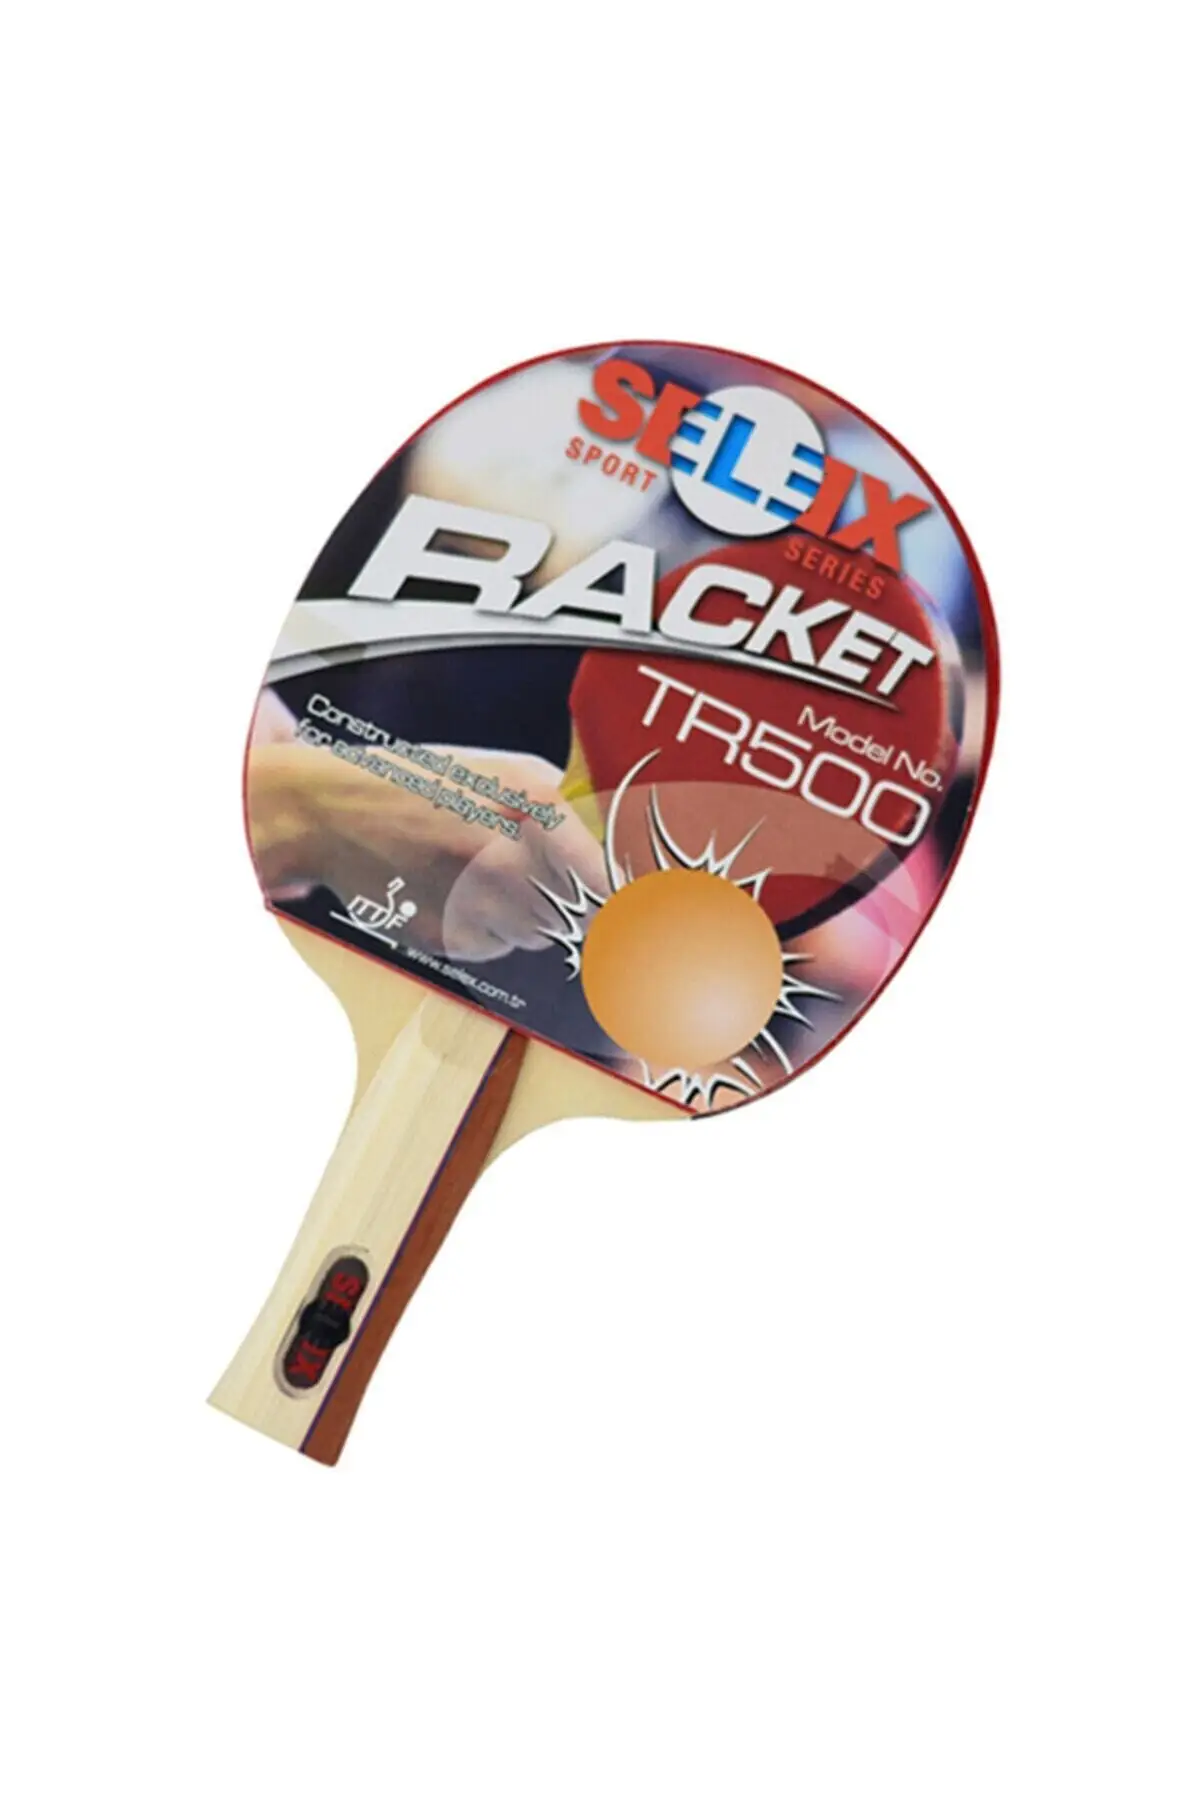 Tr 500 Ittf approved table tennis tennis equipment & accessory sports Outdoor